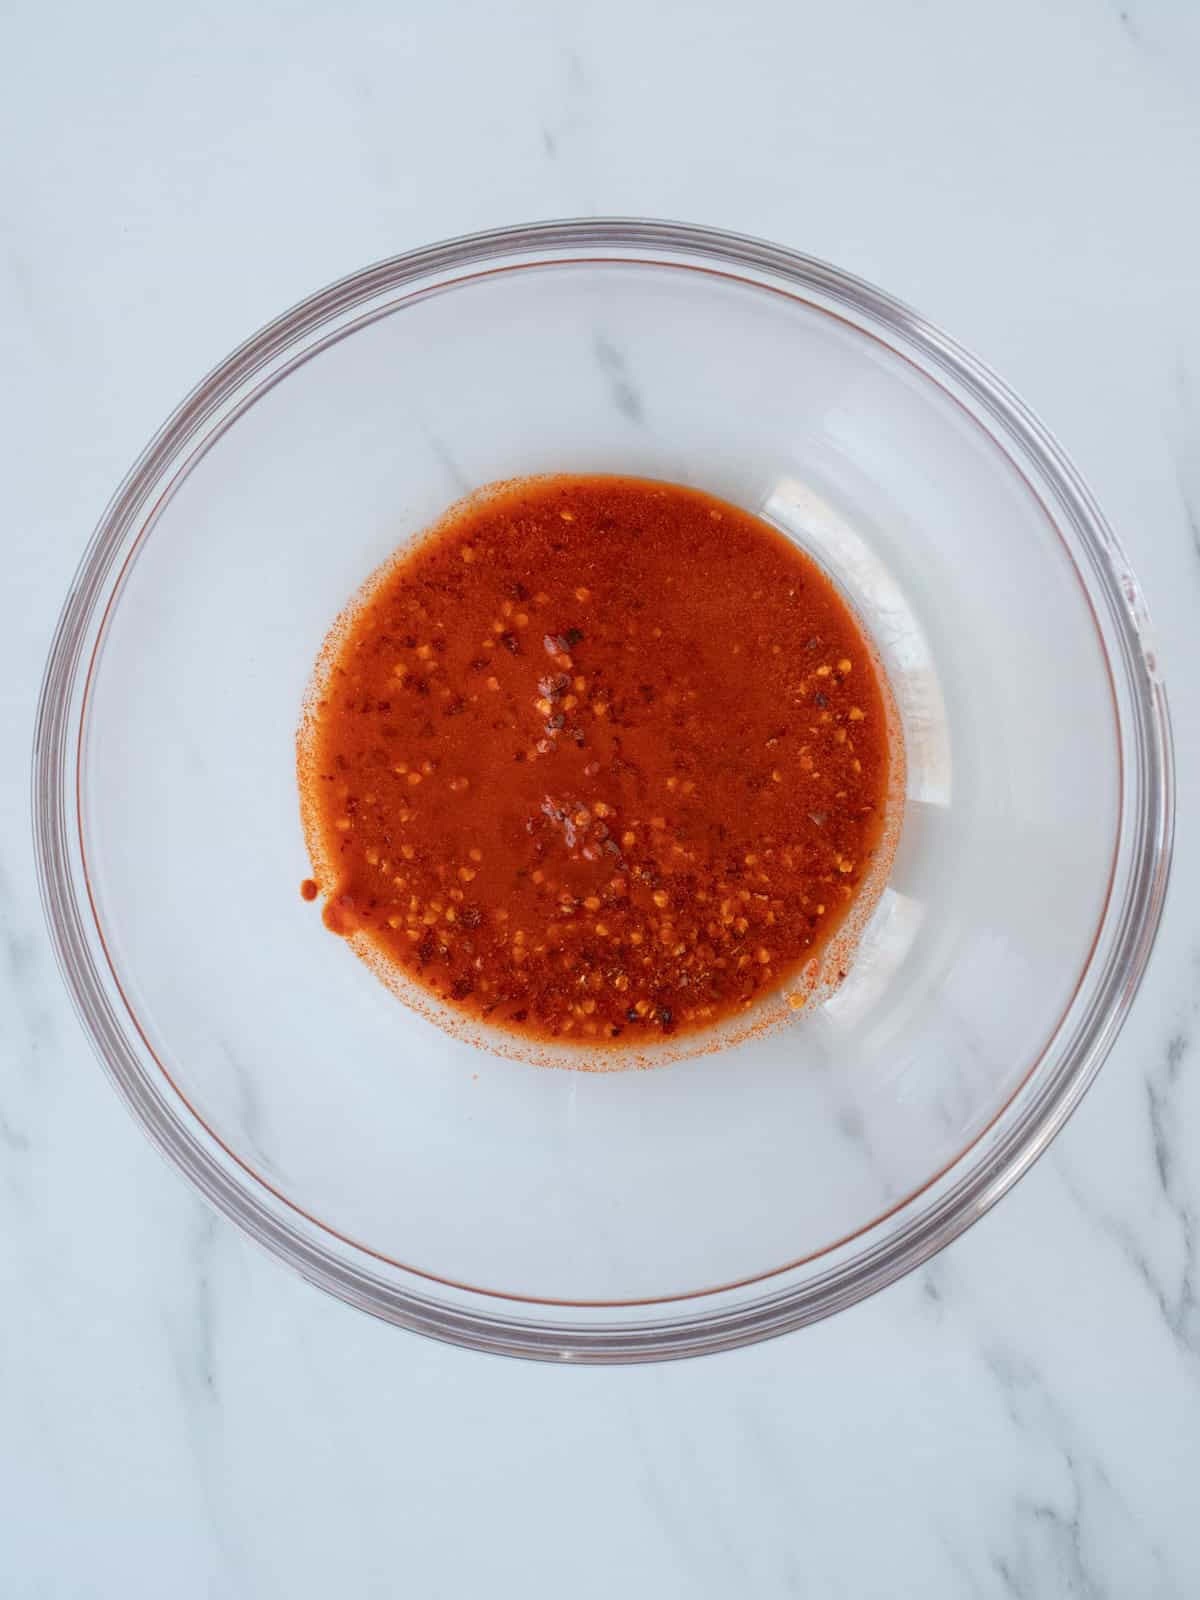 A large glass mixing bowl with crushed red pepper and paprika mixed with some hot water.